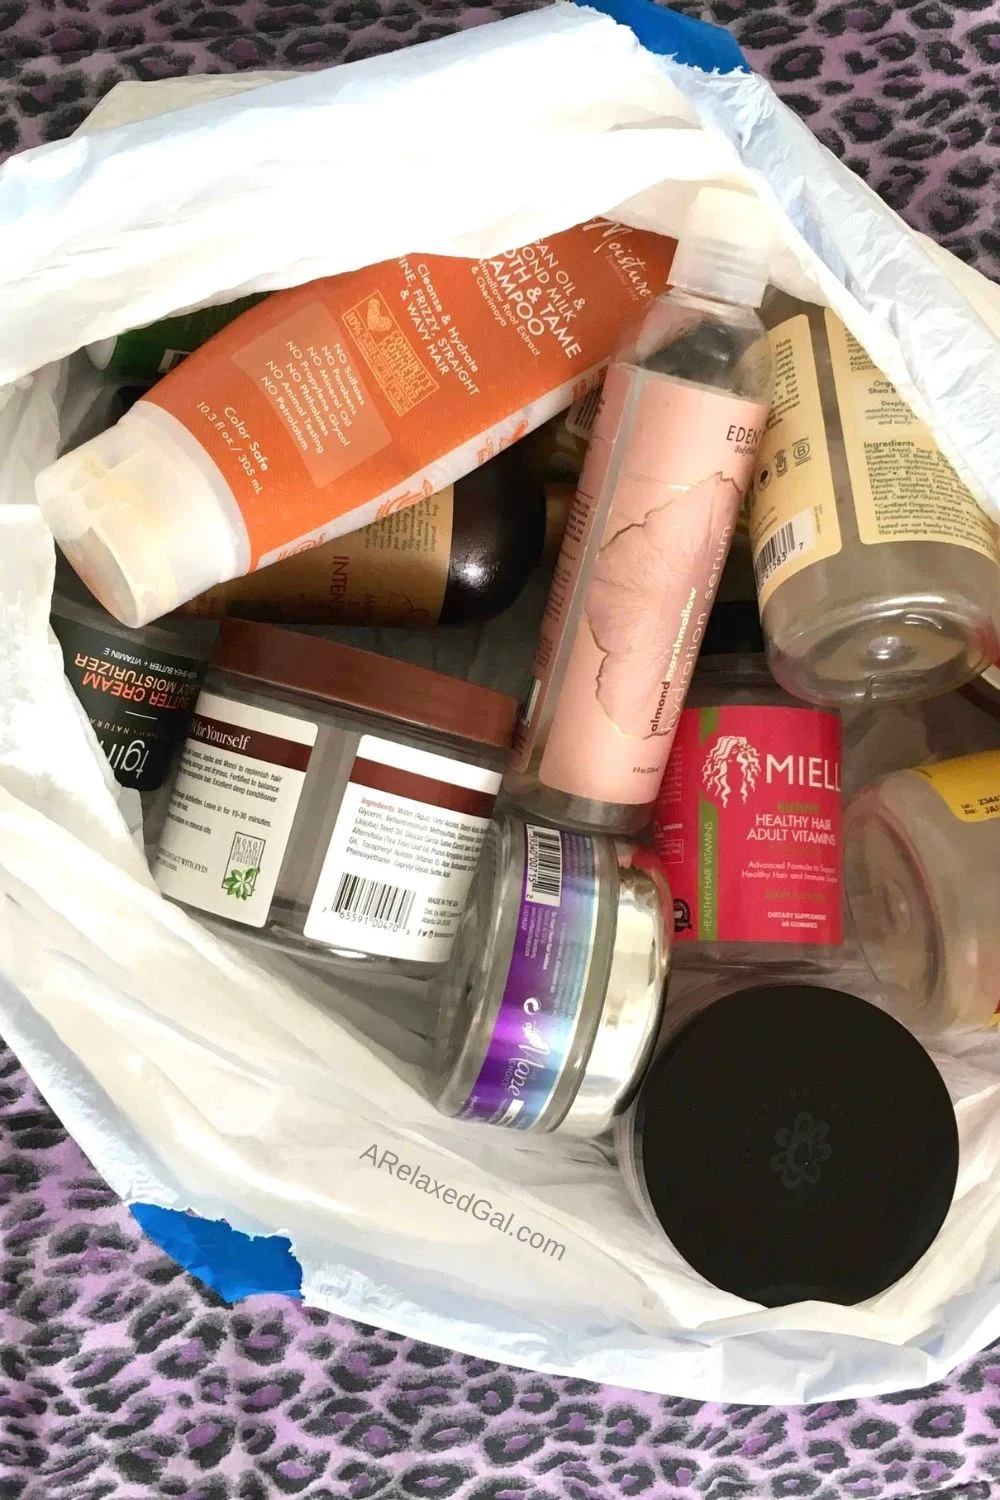 Old hair products that have expired sitting in a trash bag.